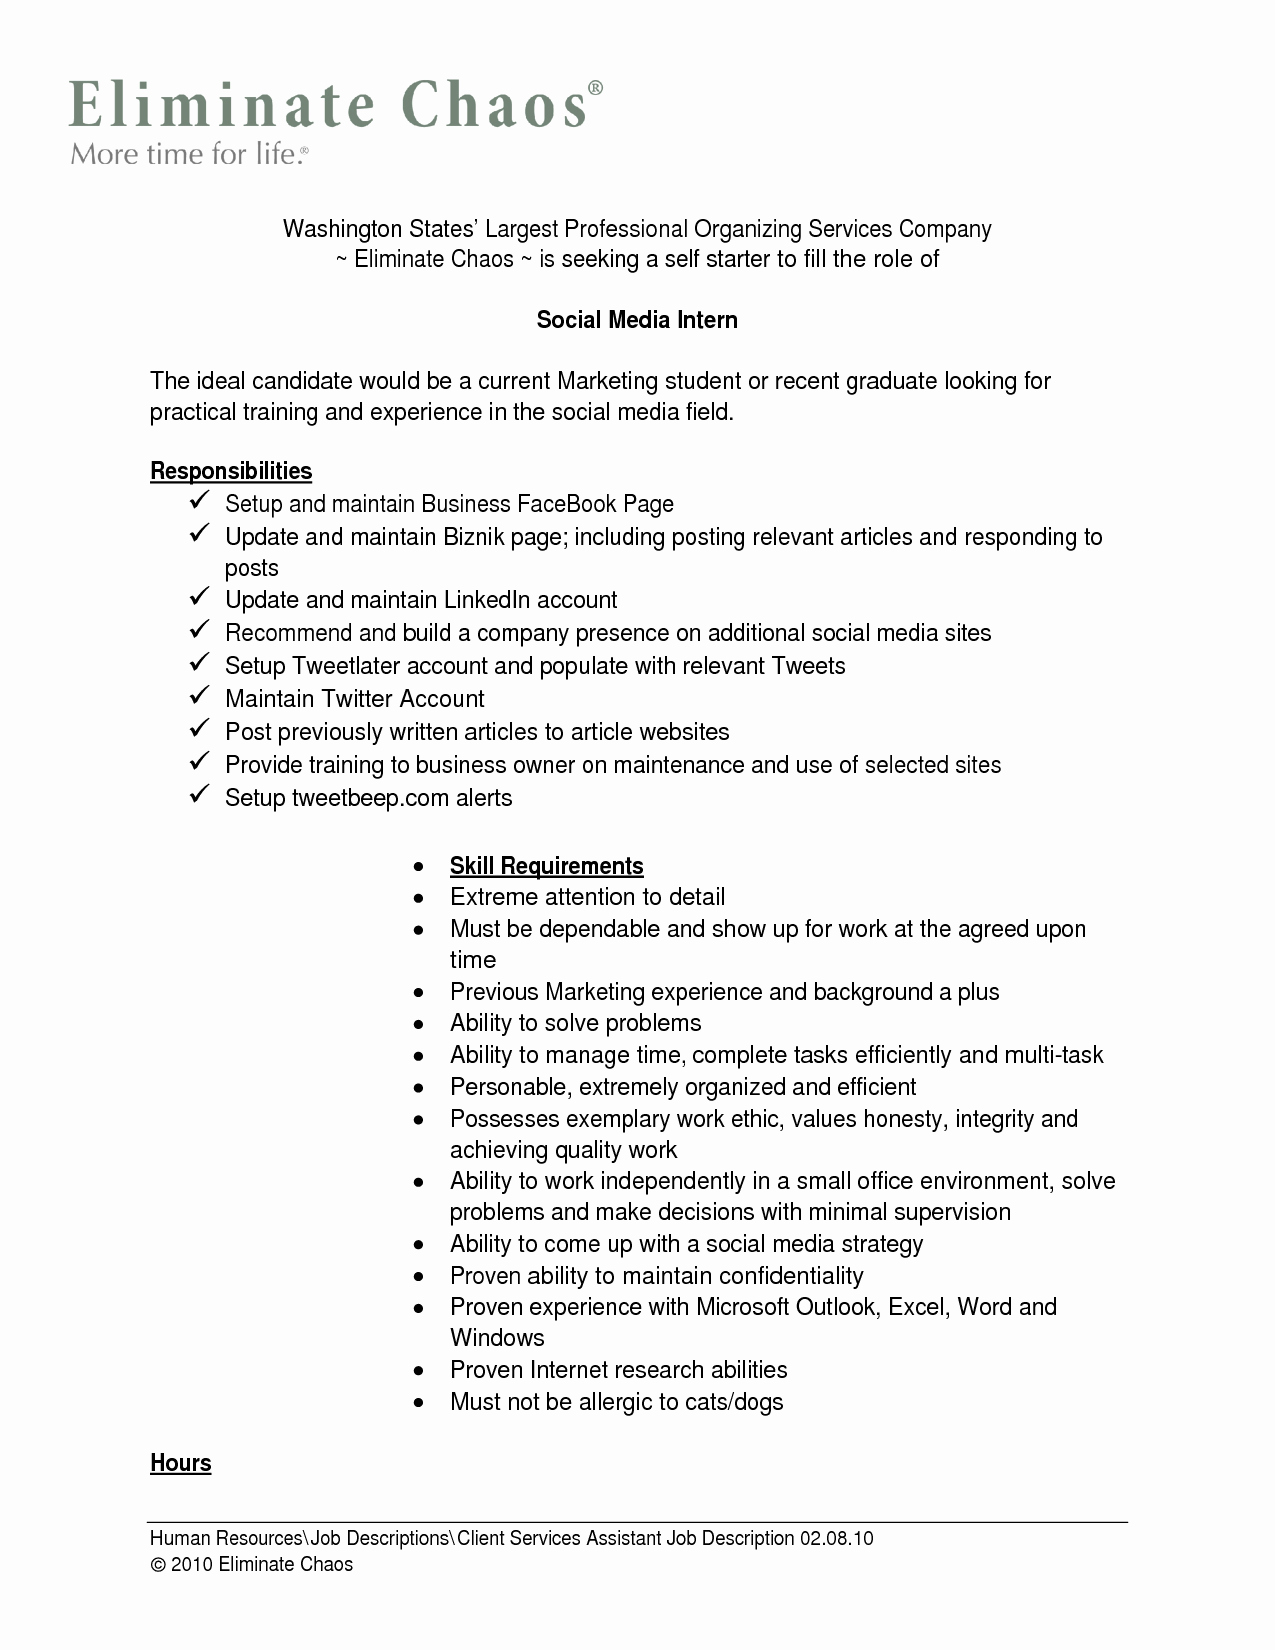 Resume Key Terms Sample Resumes for Jobs Entry Level